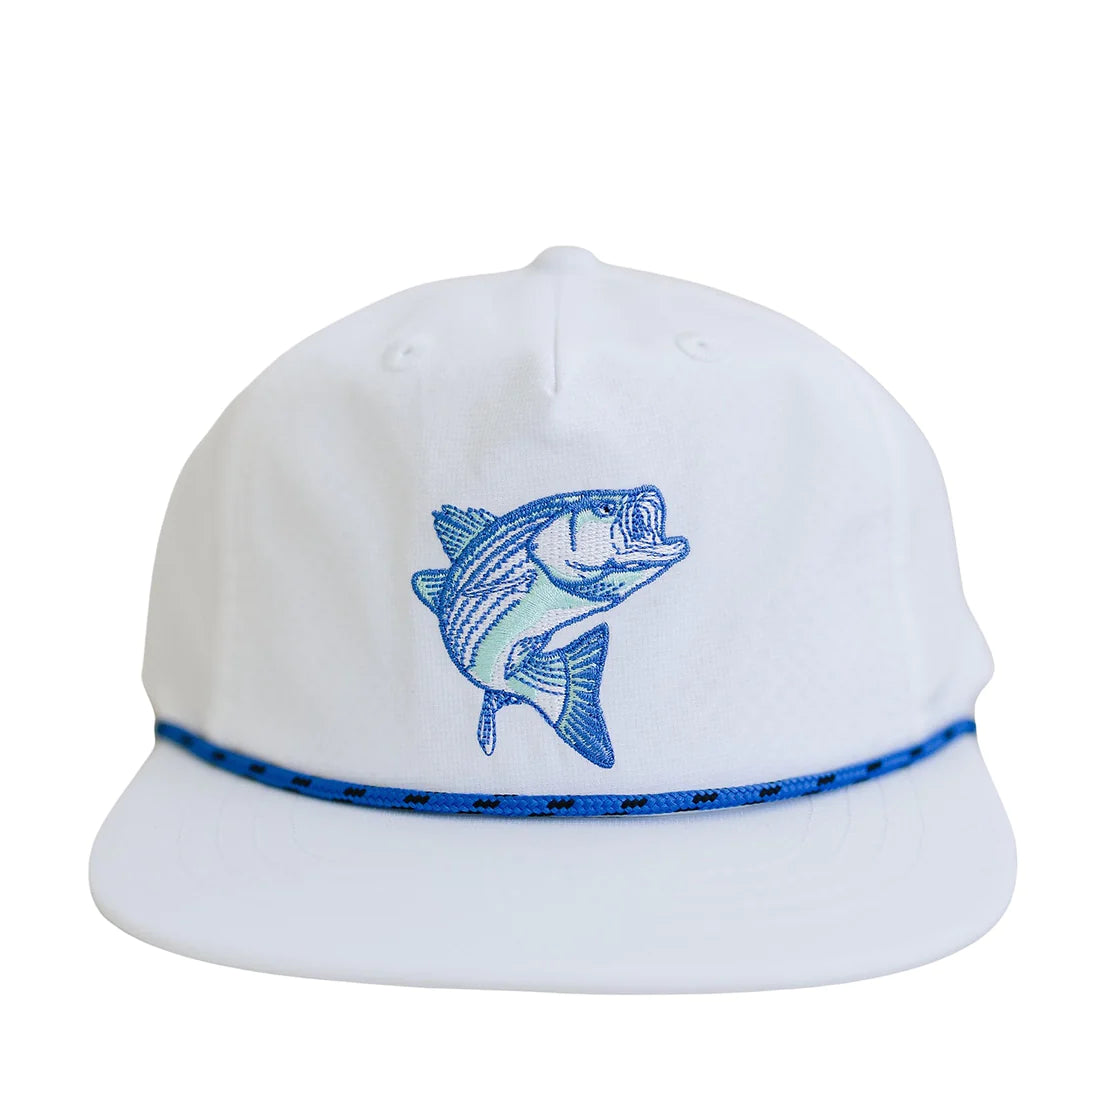 Cash and Co. Bass Pro White Hat